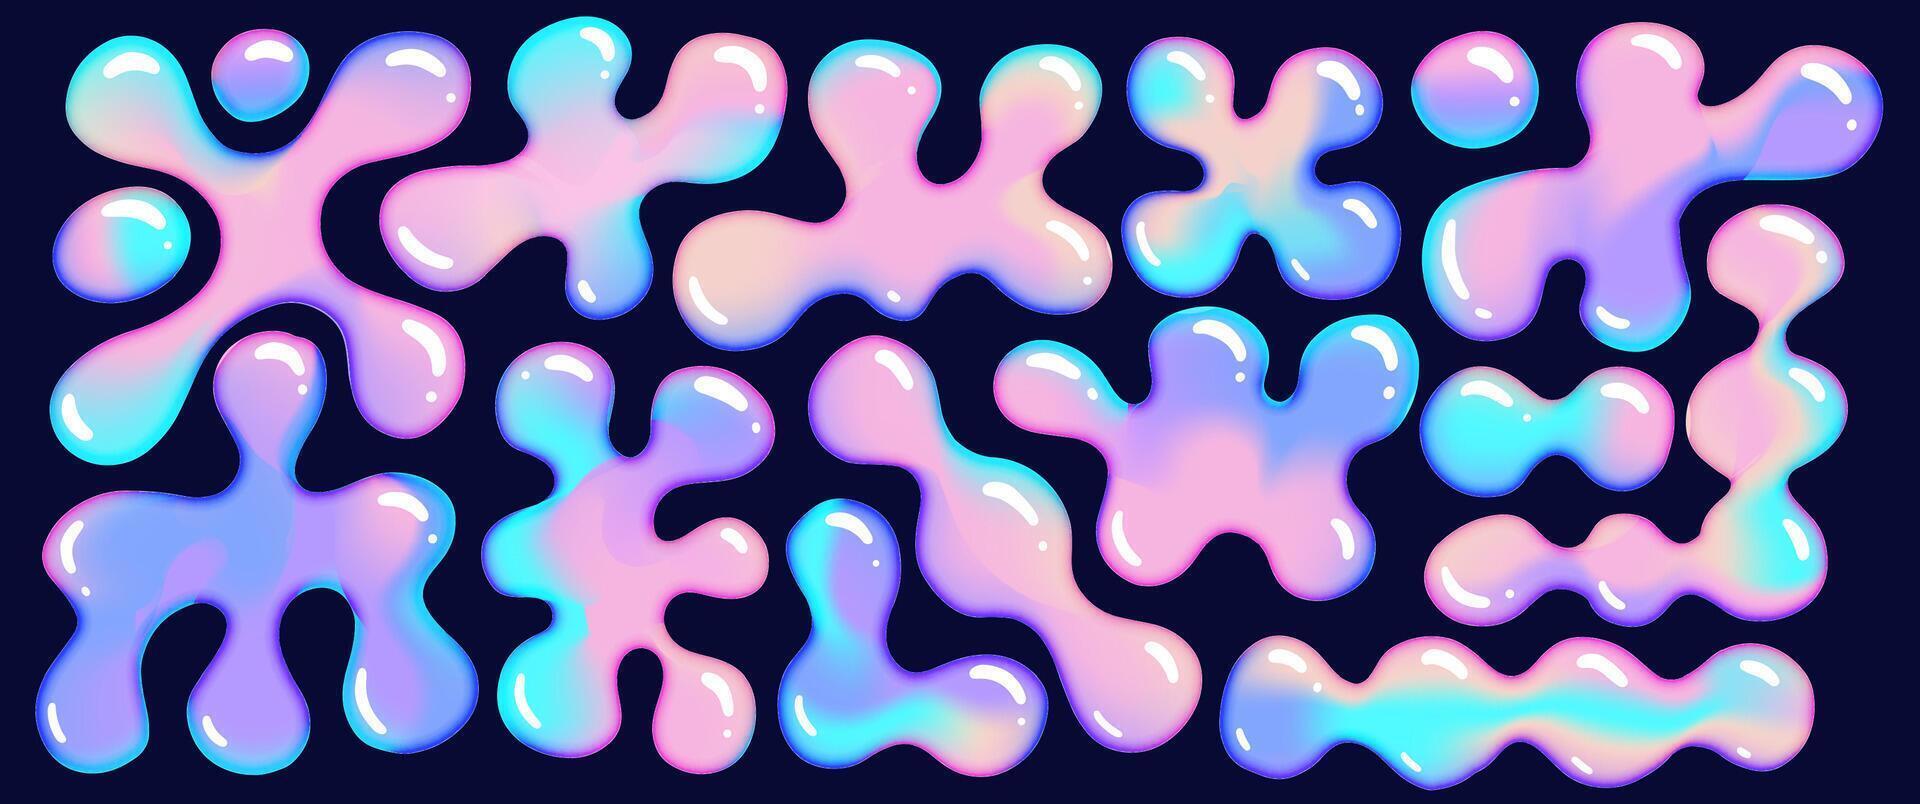 3D holo colors abstract liquid shapes set. Inflated slime objects. Realistic vector elements collection.